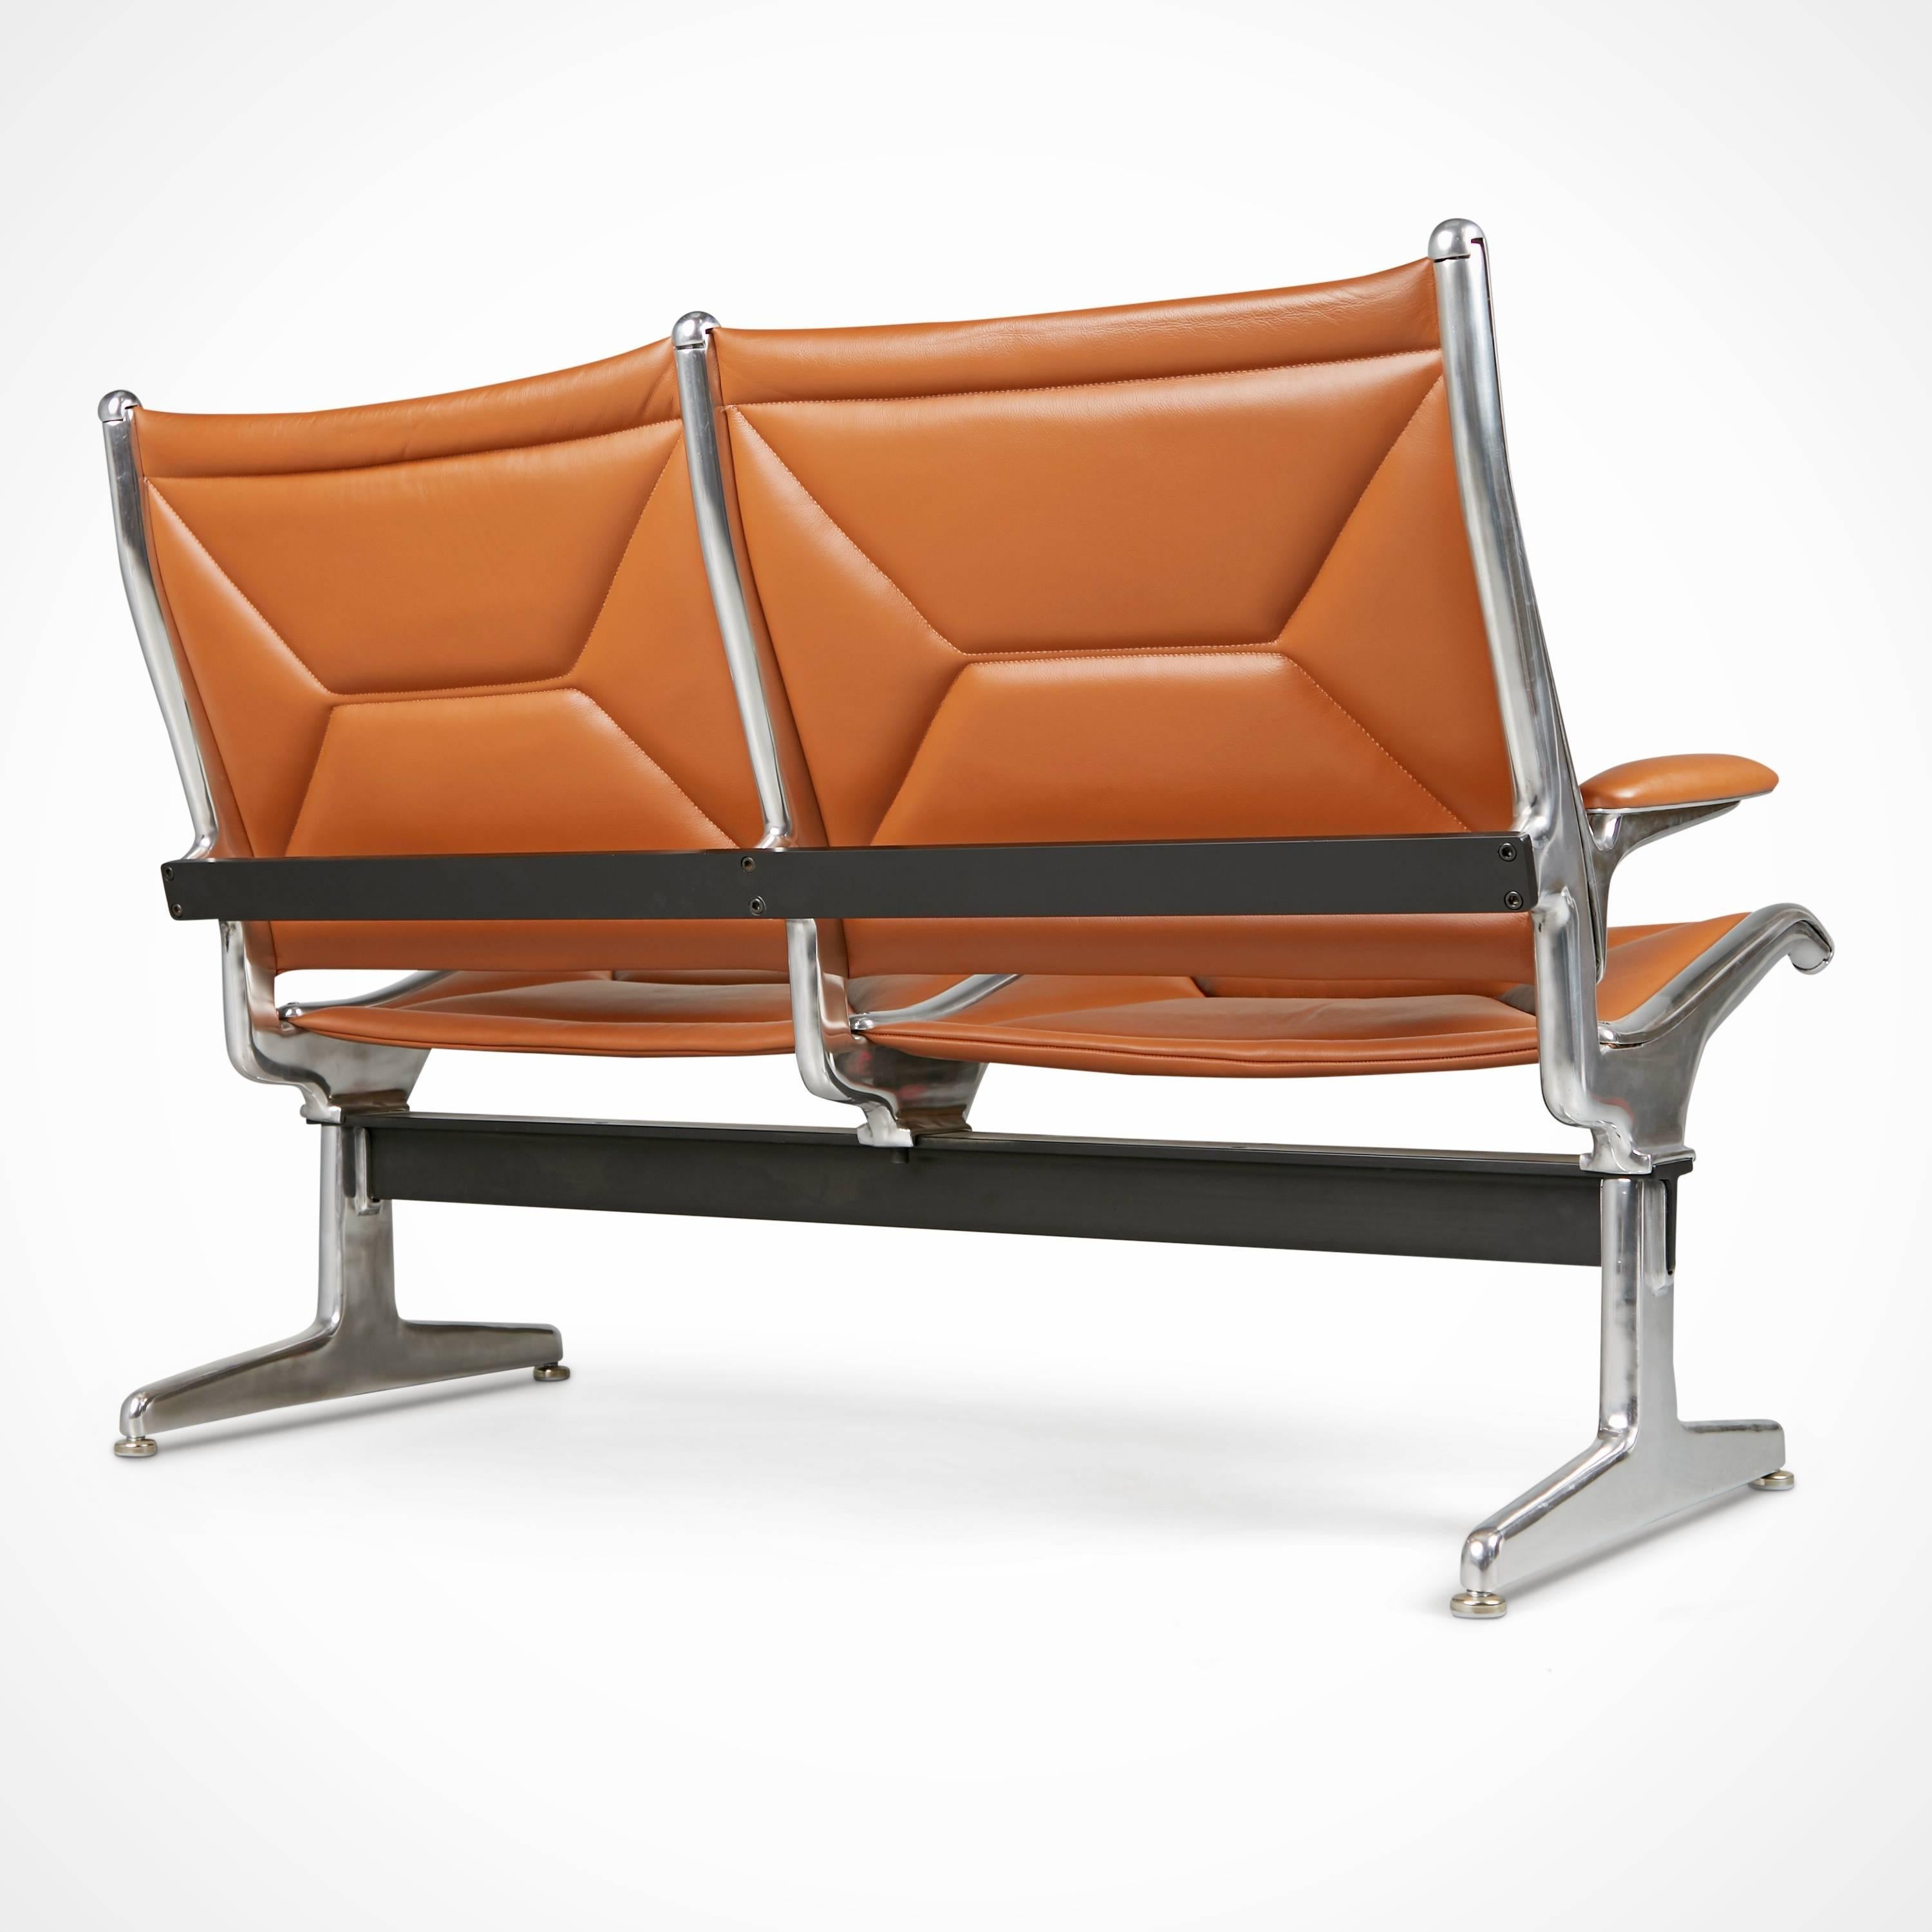 American Edelman Leather Two-Seat Tandem Sling by Charles Eames for Herman Miller